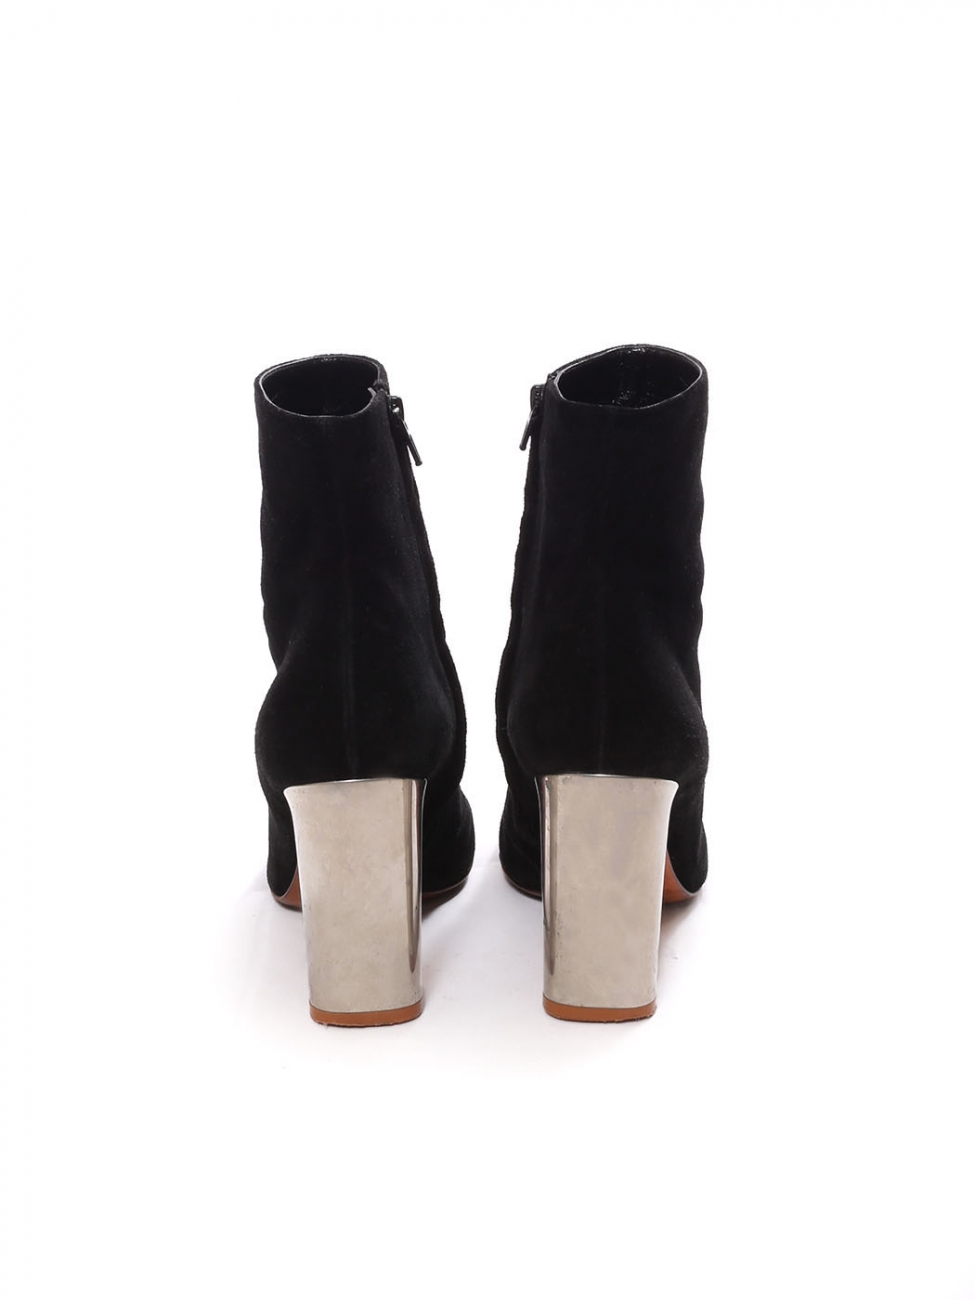 Boutique CELINE BAM BAM black suede leather ankle boots silver heel Retail  price €730 Size 38